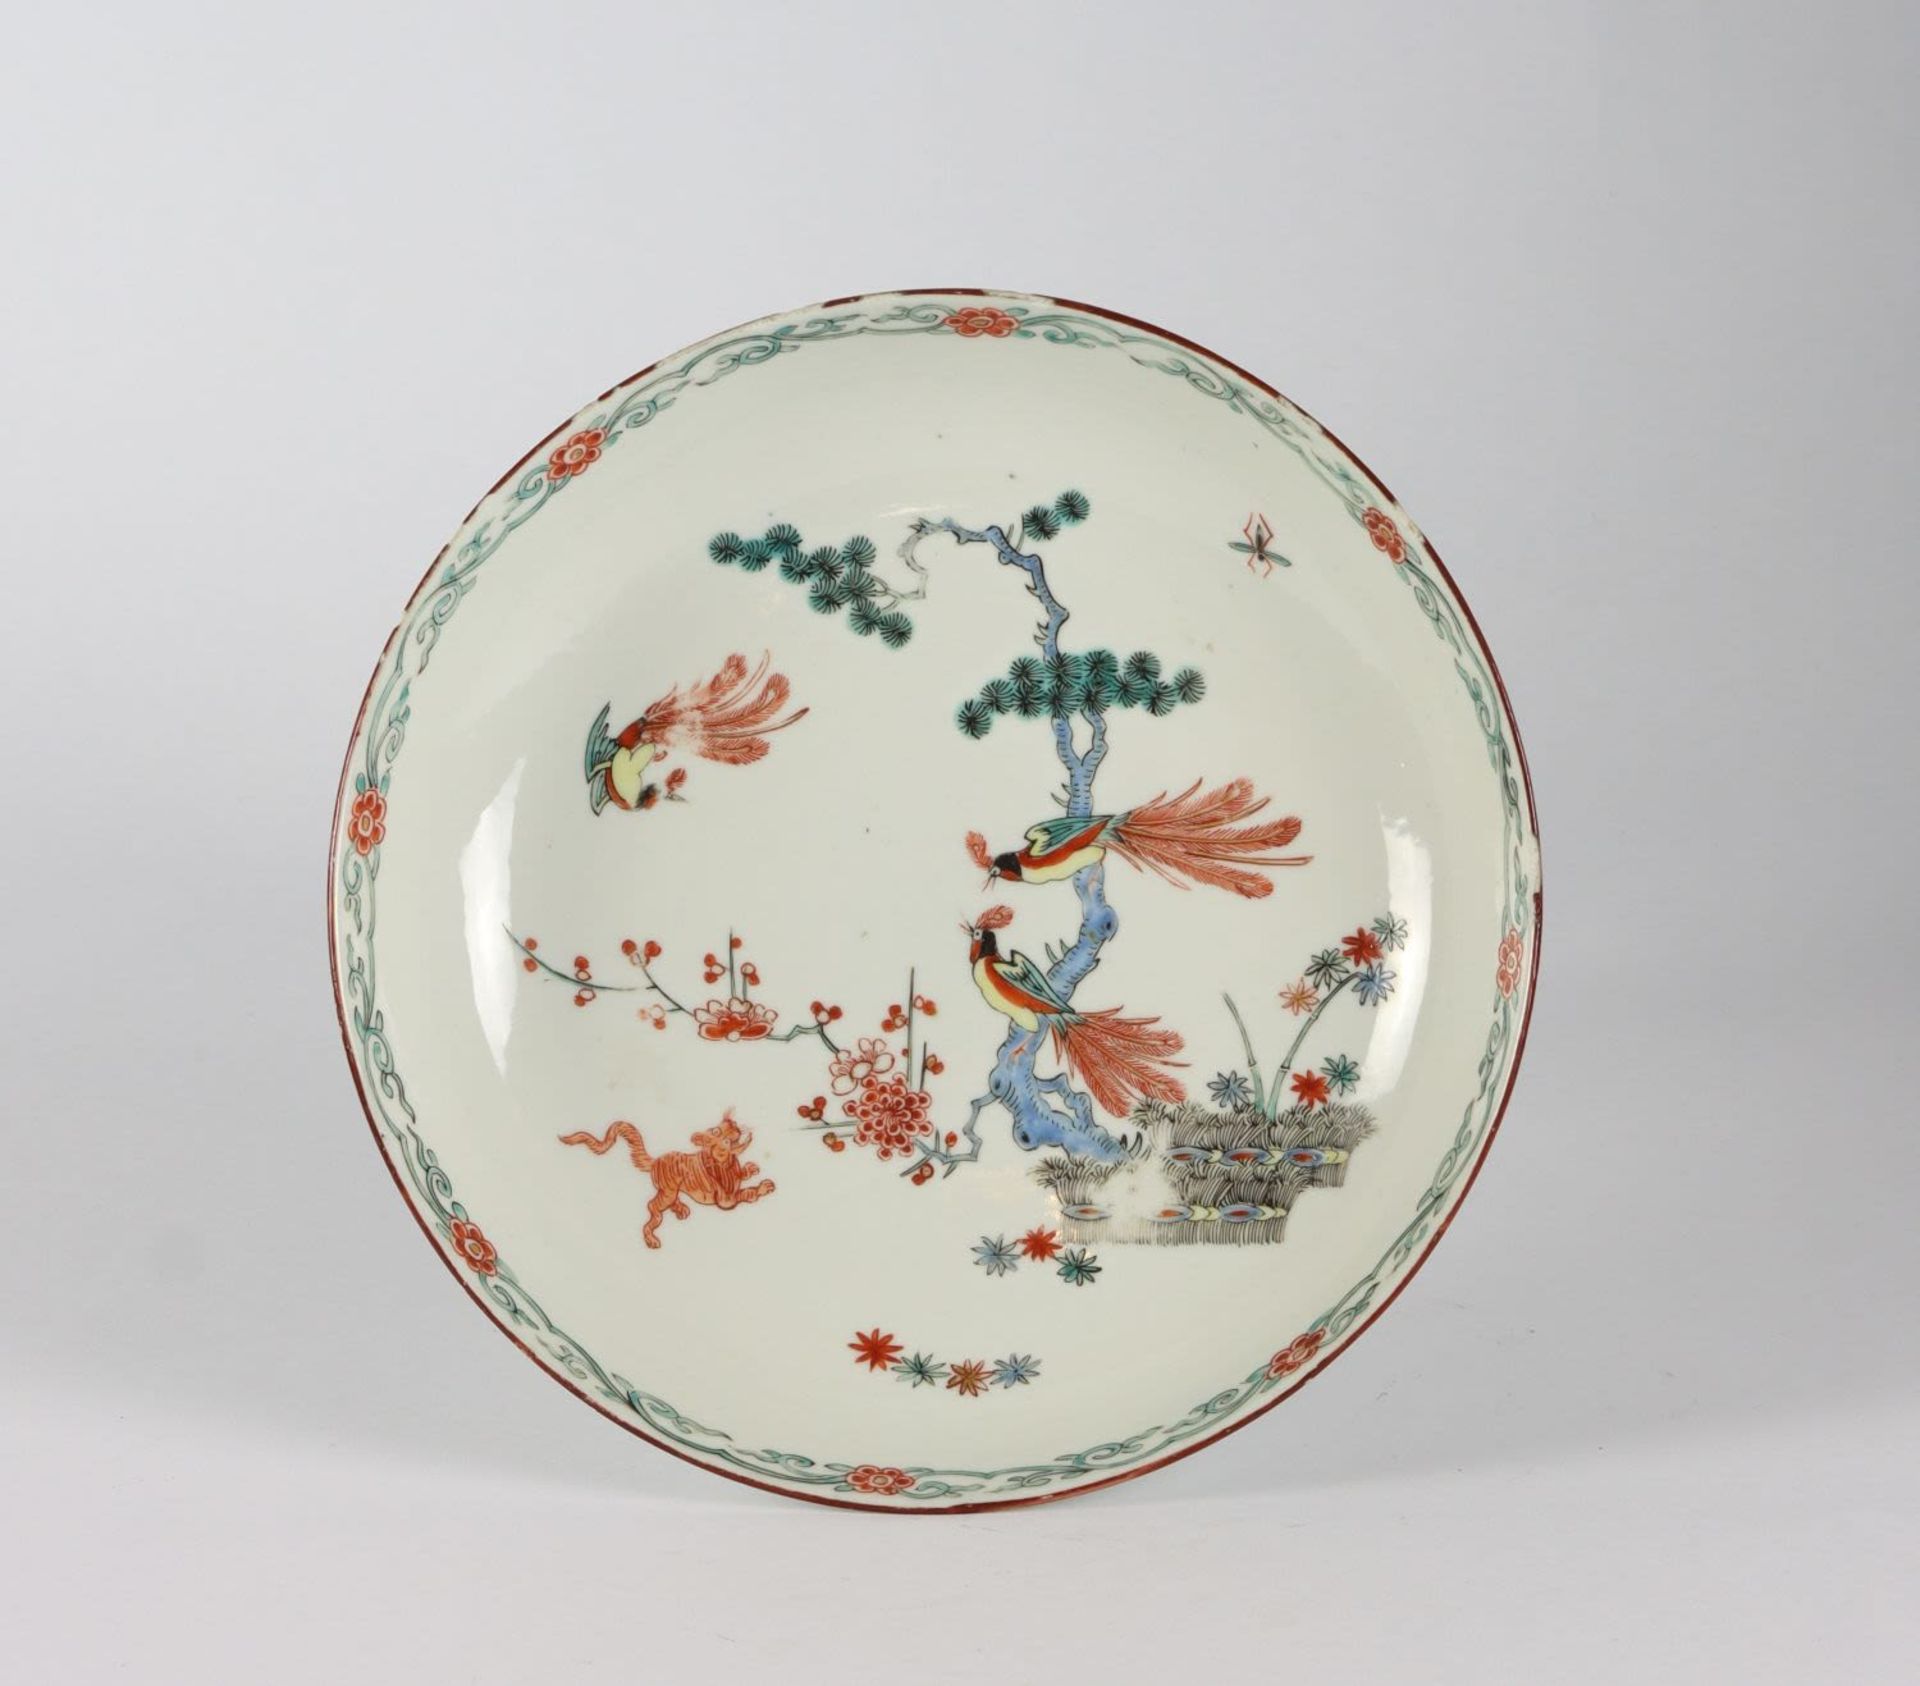 A rare Dutch Decorated Kakiemon Style Chinese Porcelain plate, 18th Century